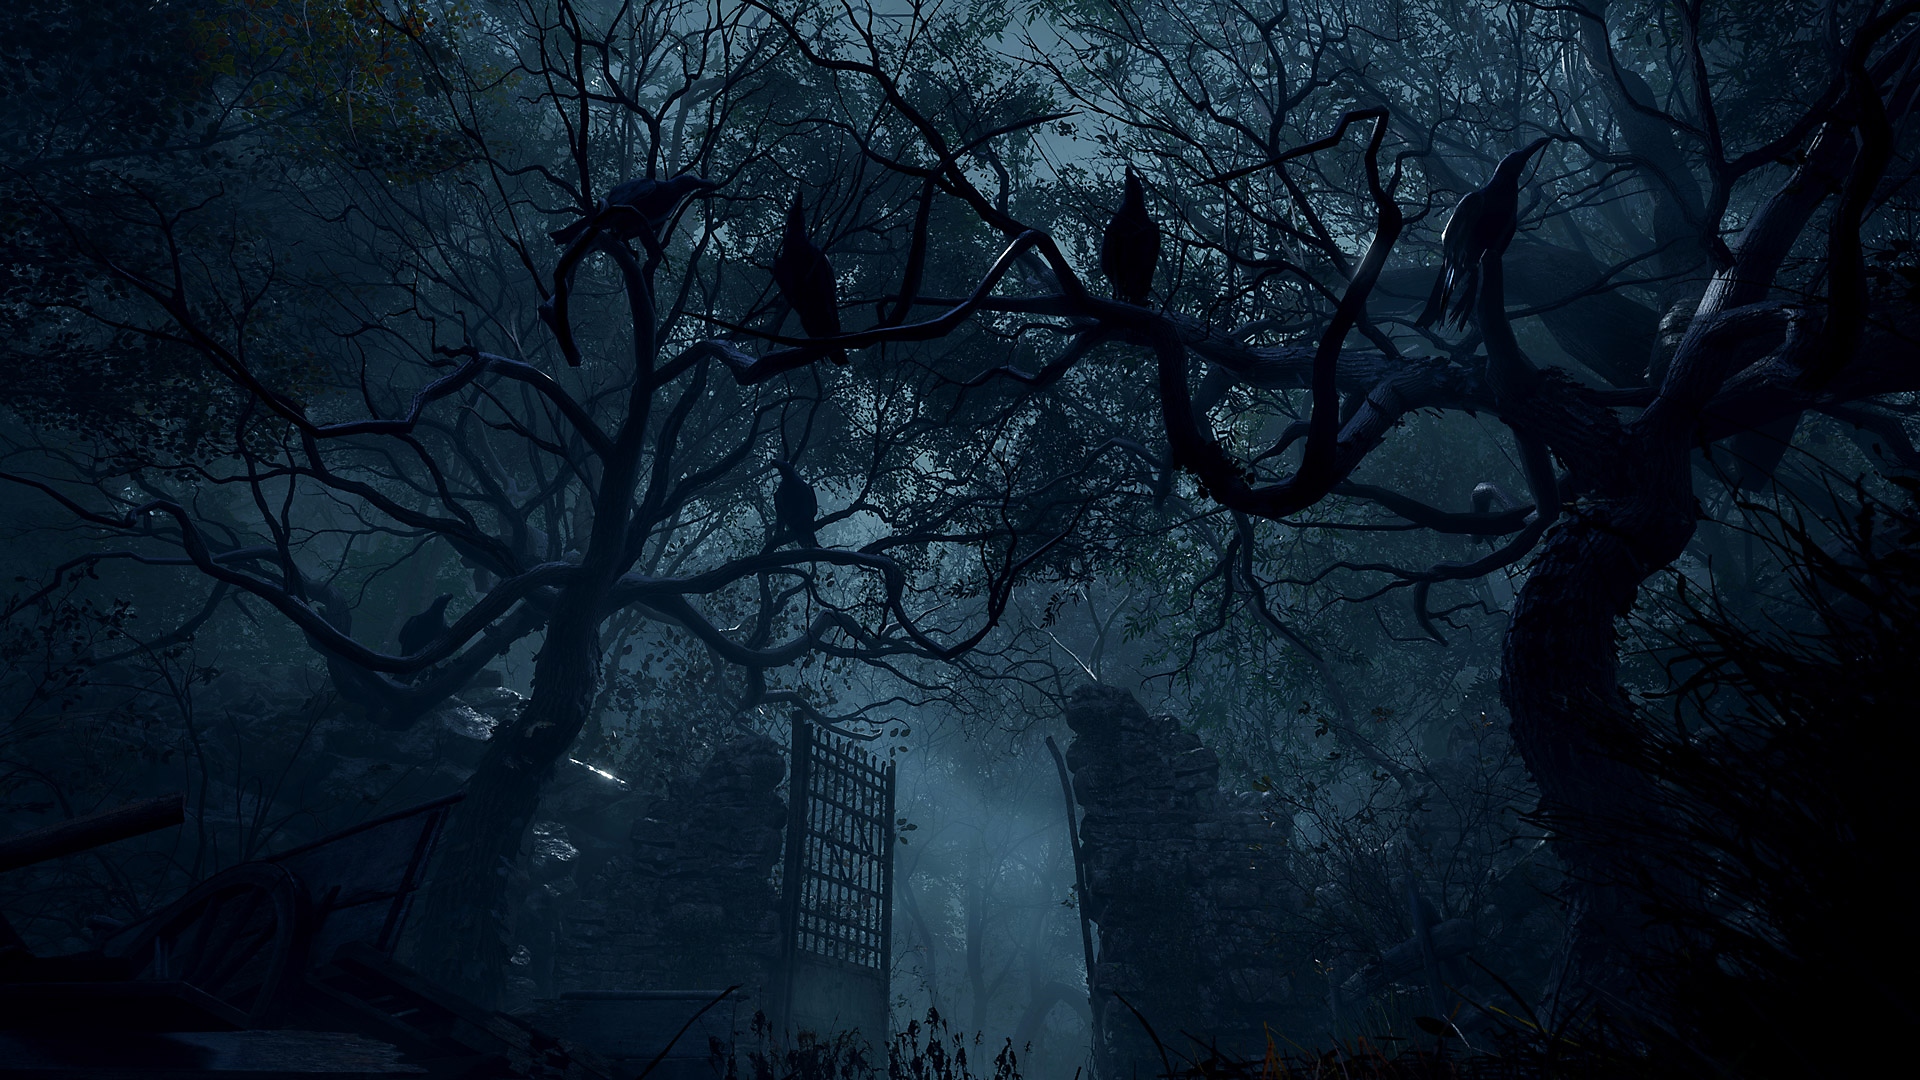 Resident Evil 4 screenshot featuring tall stone gates standing in a heavily wooded area.